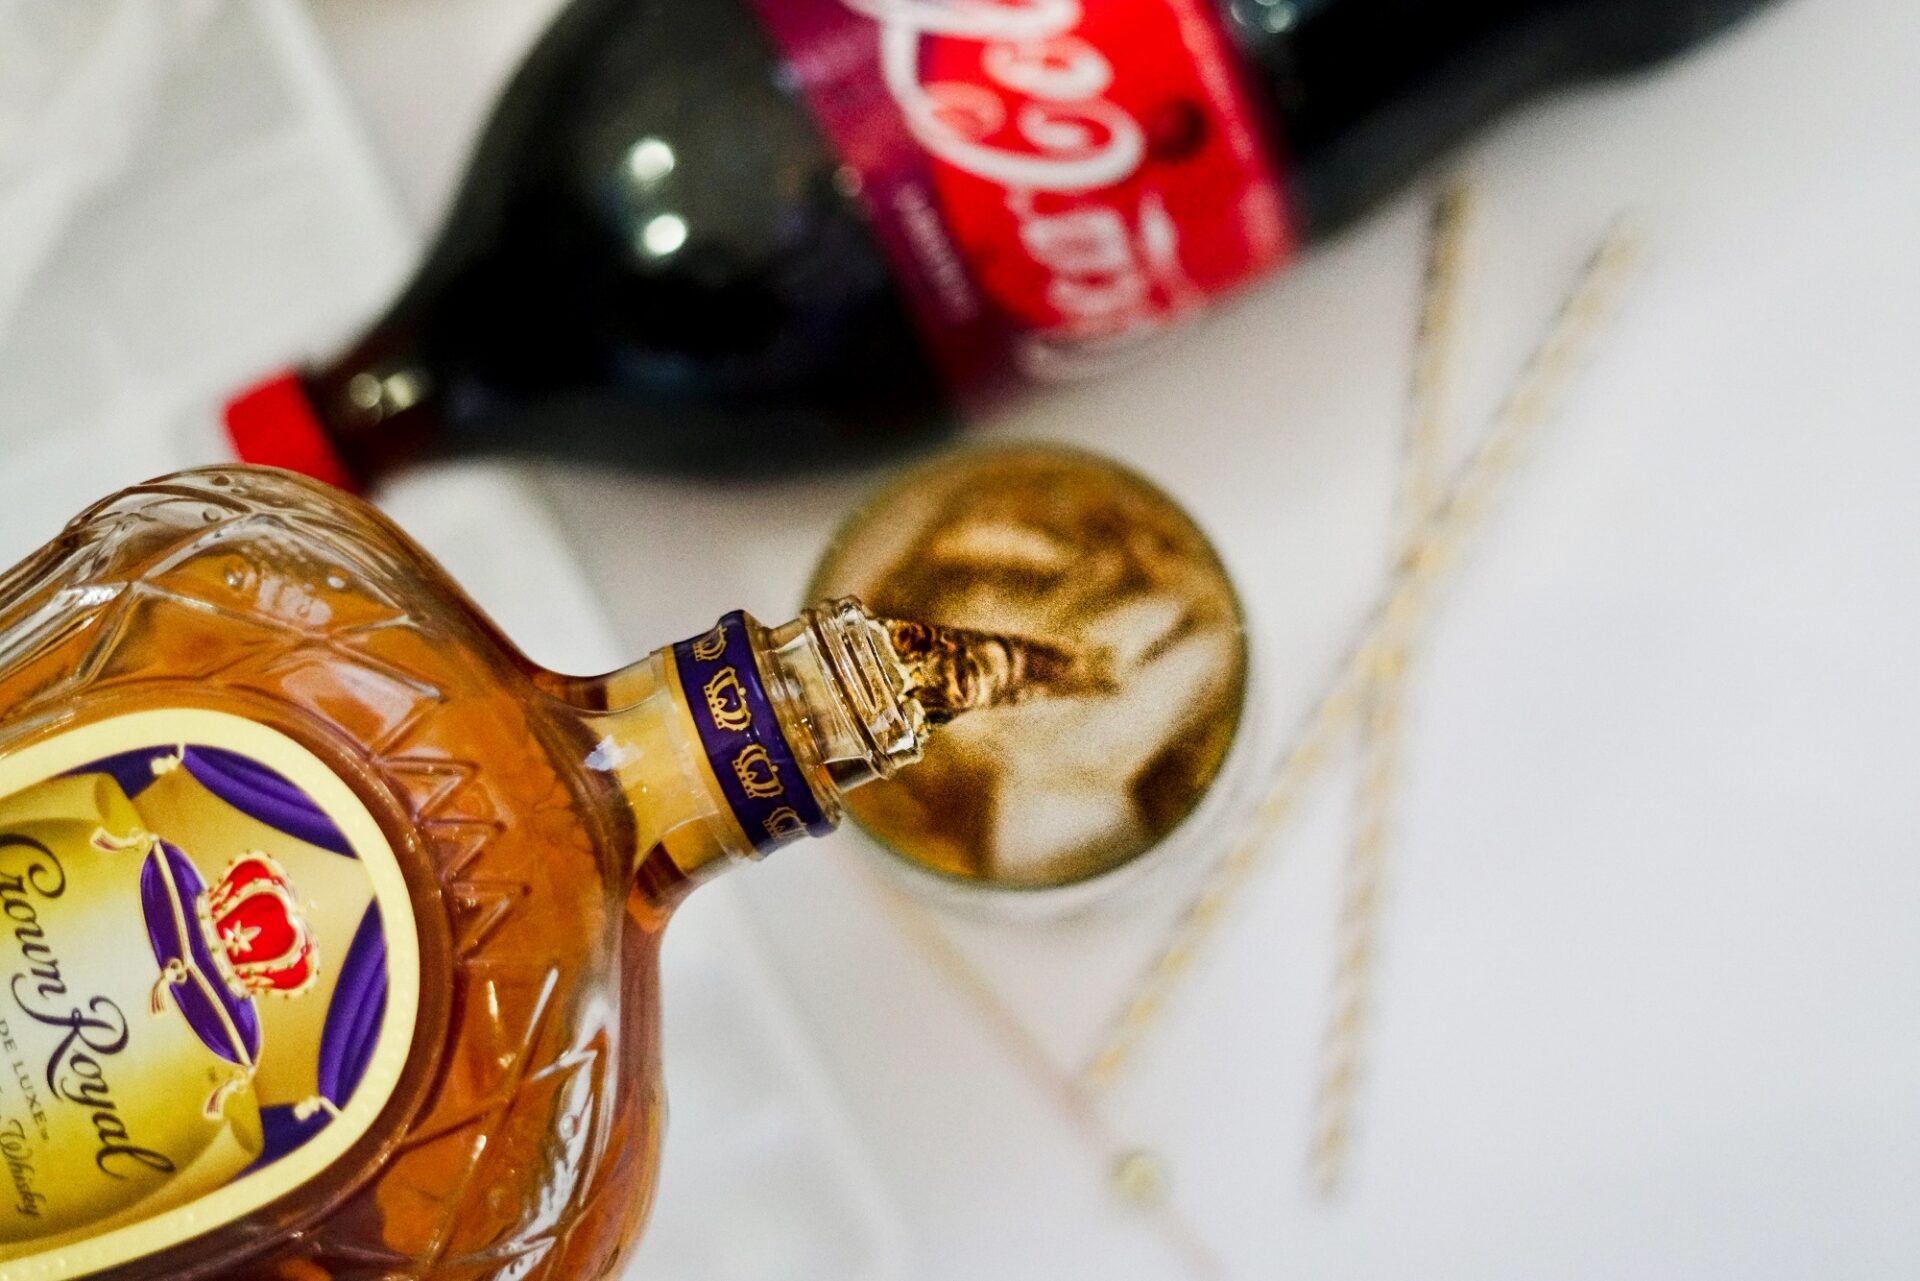 Pouring crown royal whiskey into a glass.